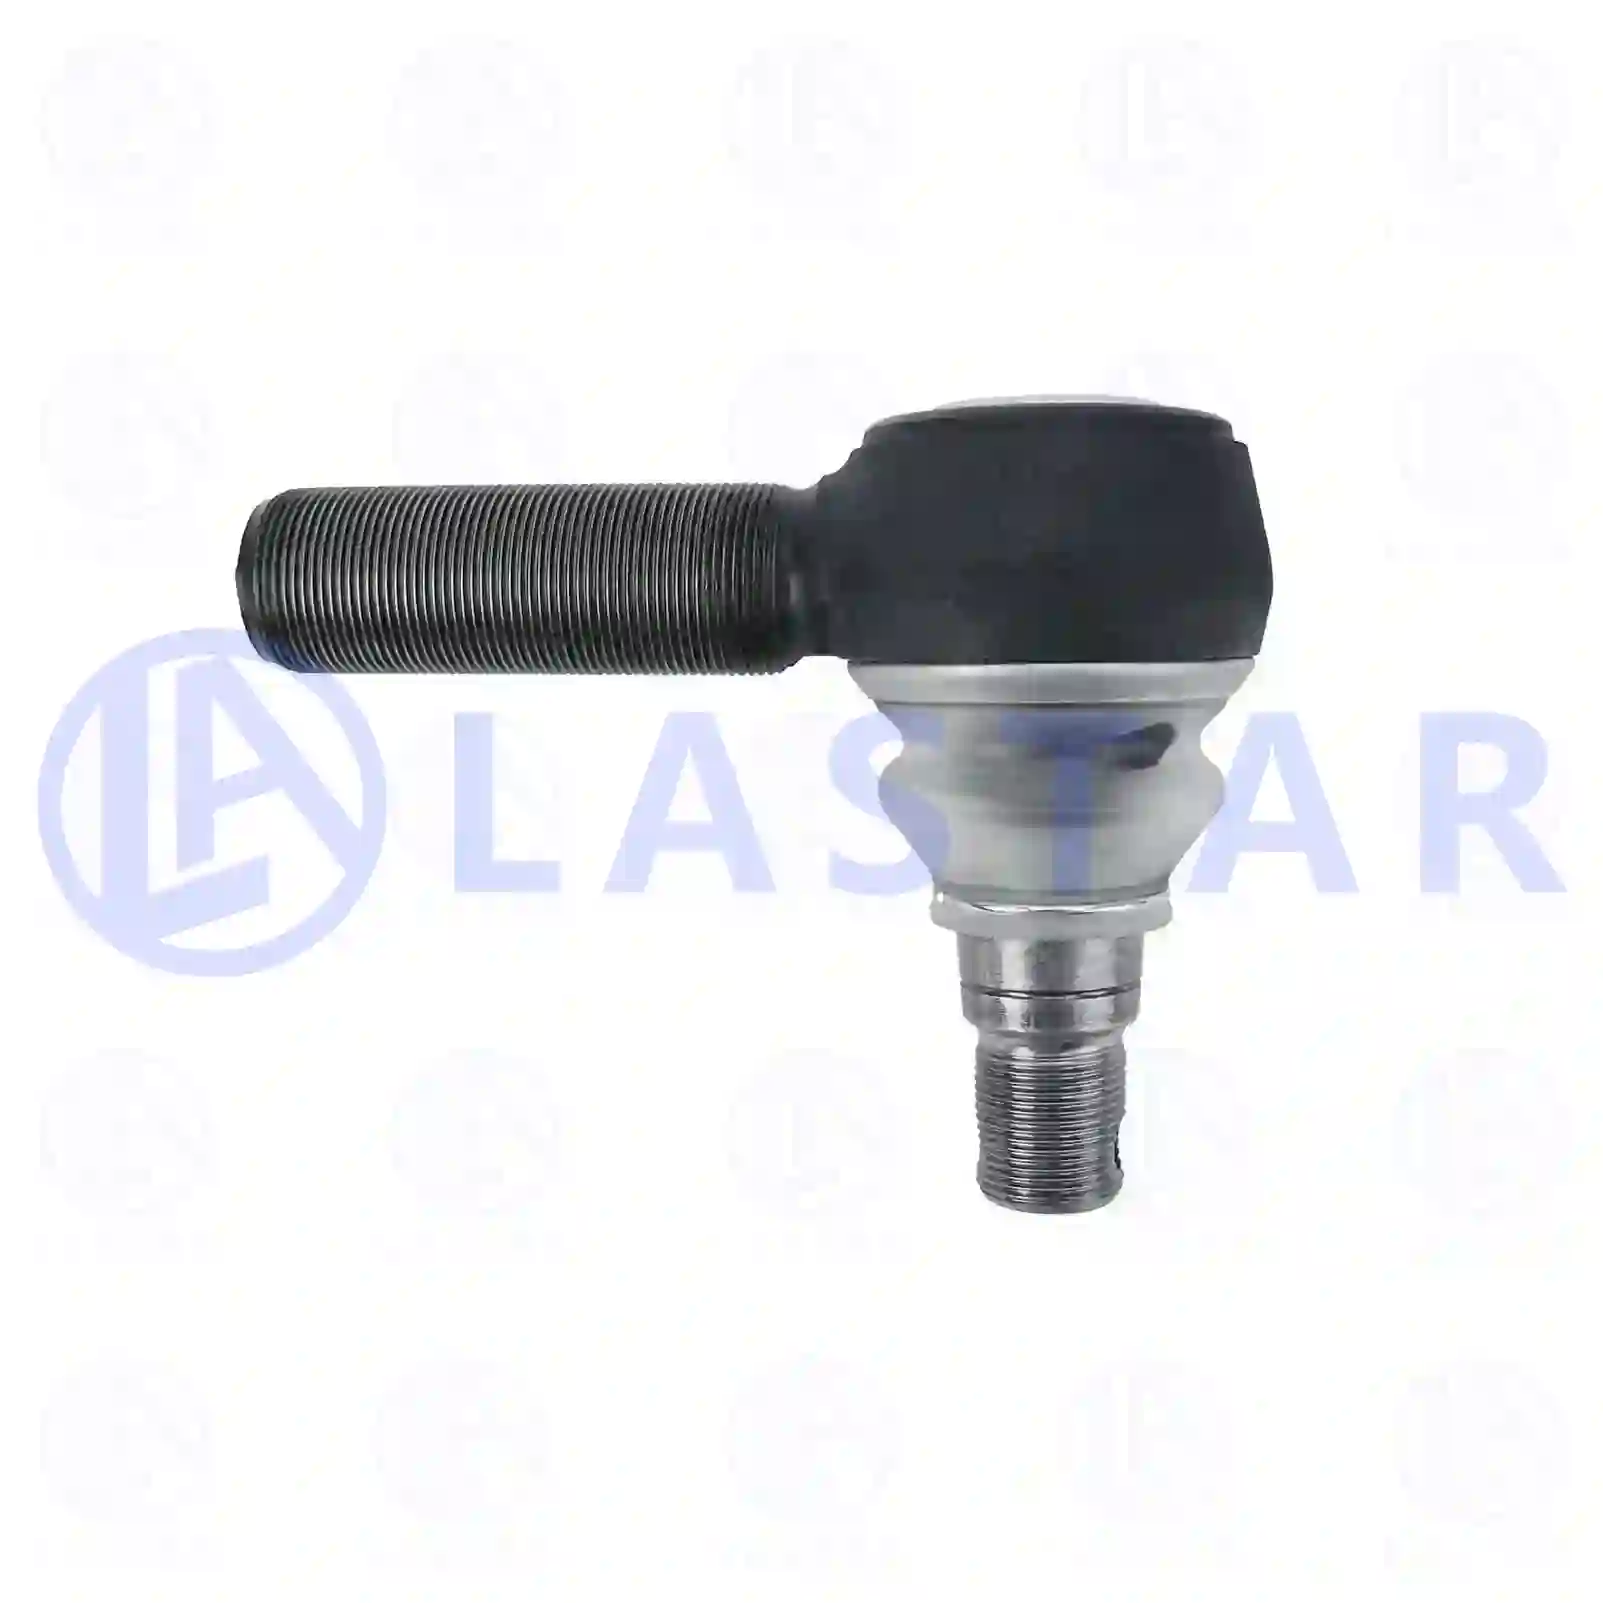 Ball joint, left hand thread, 77705872, 1131744, 1313744, 1698558, 1698840, 3092795, 6869744, 6882112, 6889481, 85114147, ZG40348-0008 ||  77705872 Lastar Spare Part | Truck Spare Parts, Auotomotive Spare Parts Ball joint, left hand thread, 77705872, 1131744, 1313744, 1698558, 1698840, 3092795, 6869744, 6882112, 6889481, 85114147, ZG40348-0008 ||  77705872 Lastar Spare Part | Truck Spare Parts, Auotomotive Spare Parts